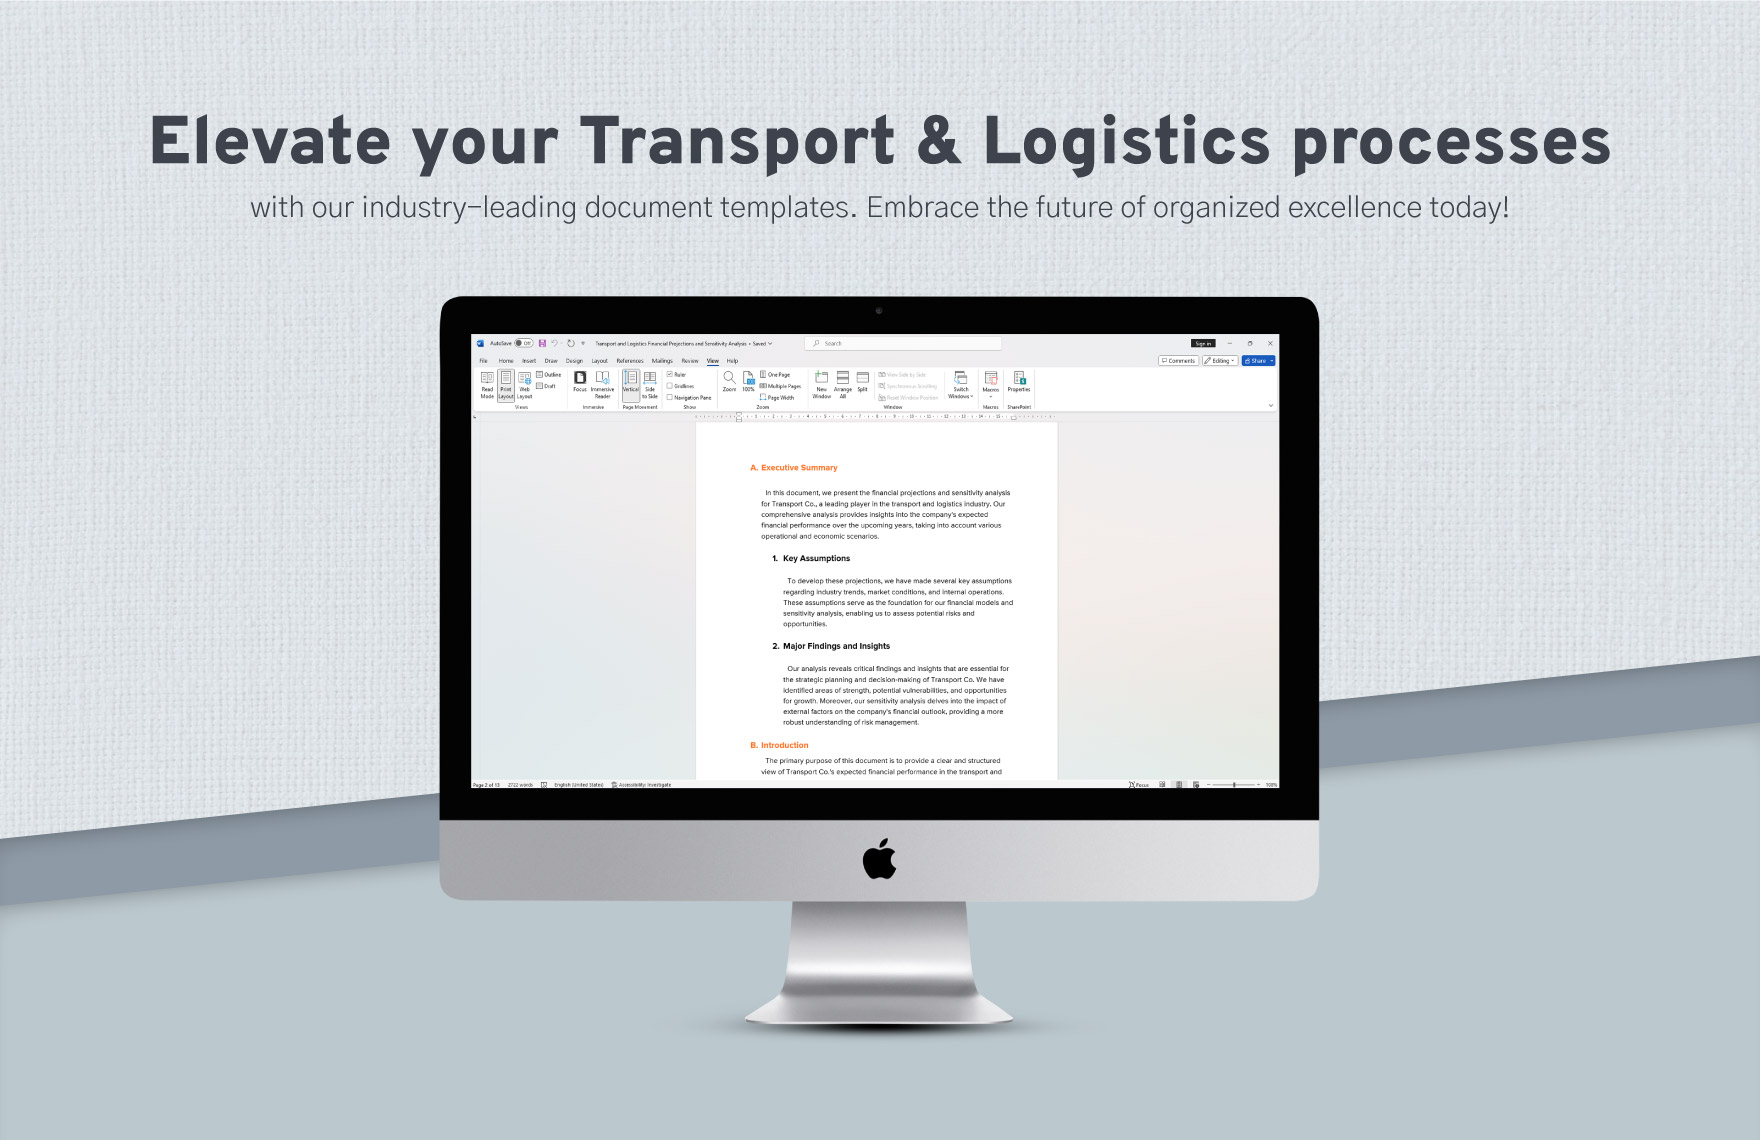 Transport and Logistics Financial Projections and Sensitivity Analysis Template